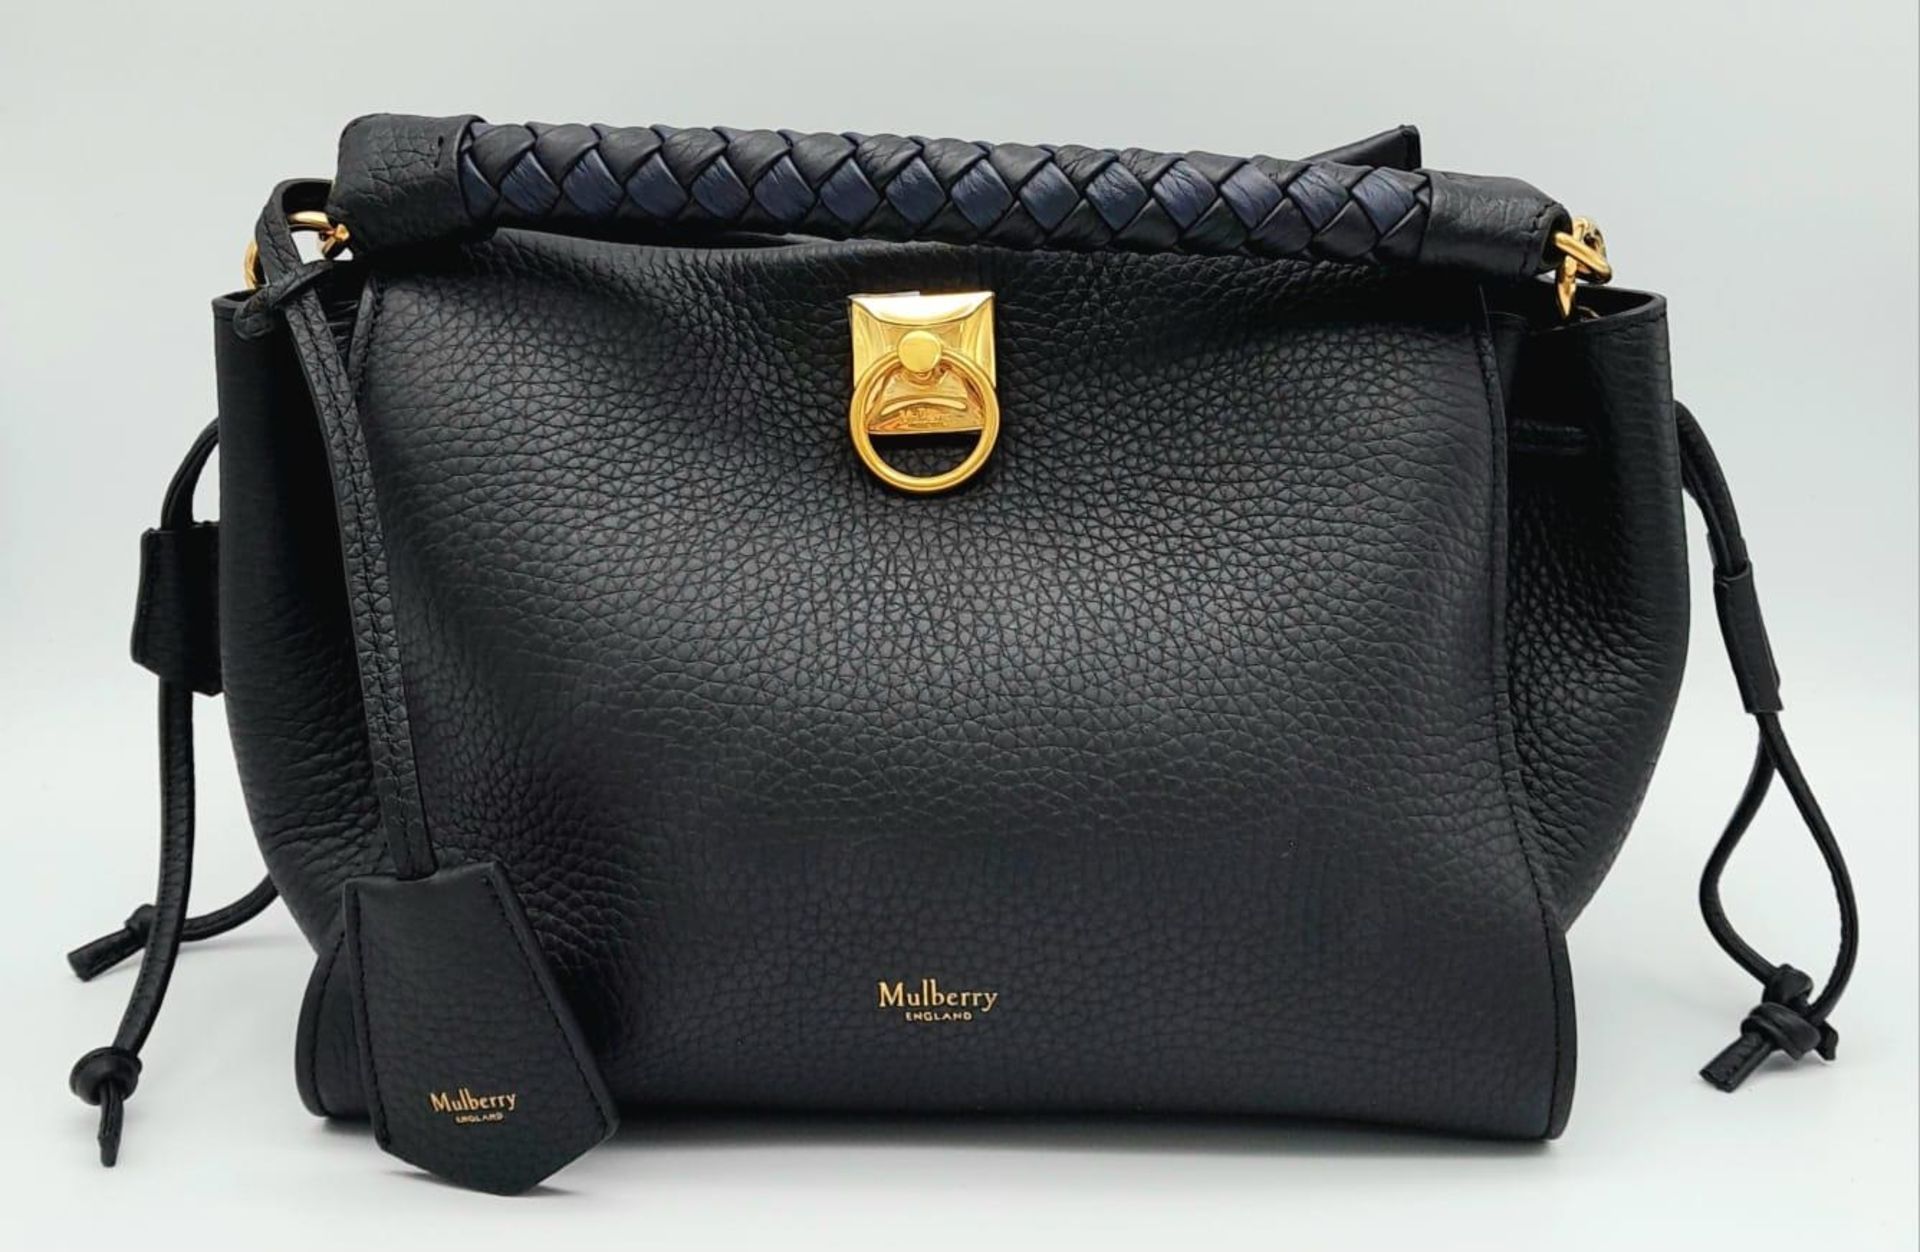 The Mulberry Midnight-Black Iris small Shoulder bag. Braided top handle, detachable fob with foil-